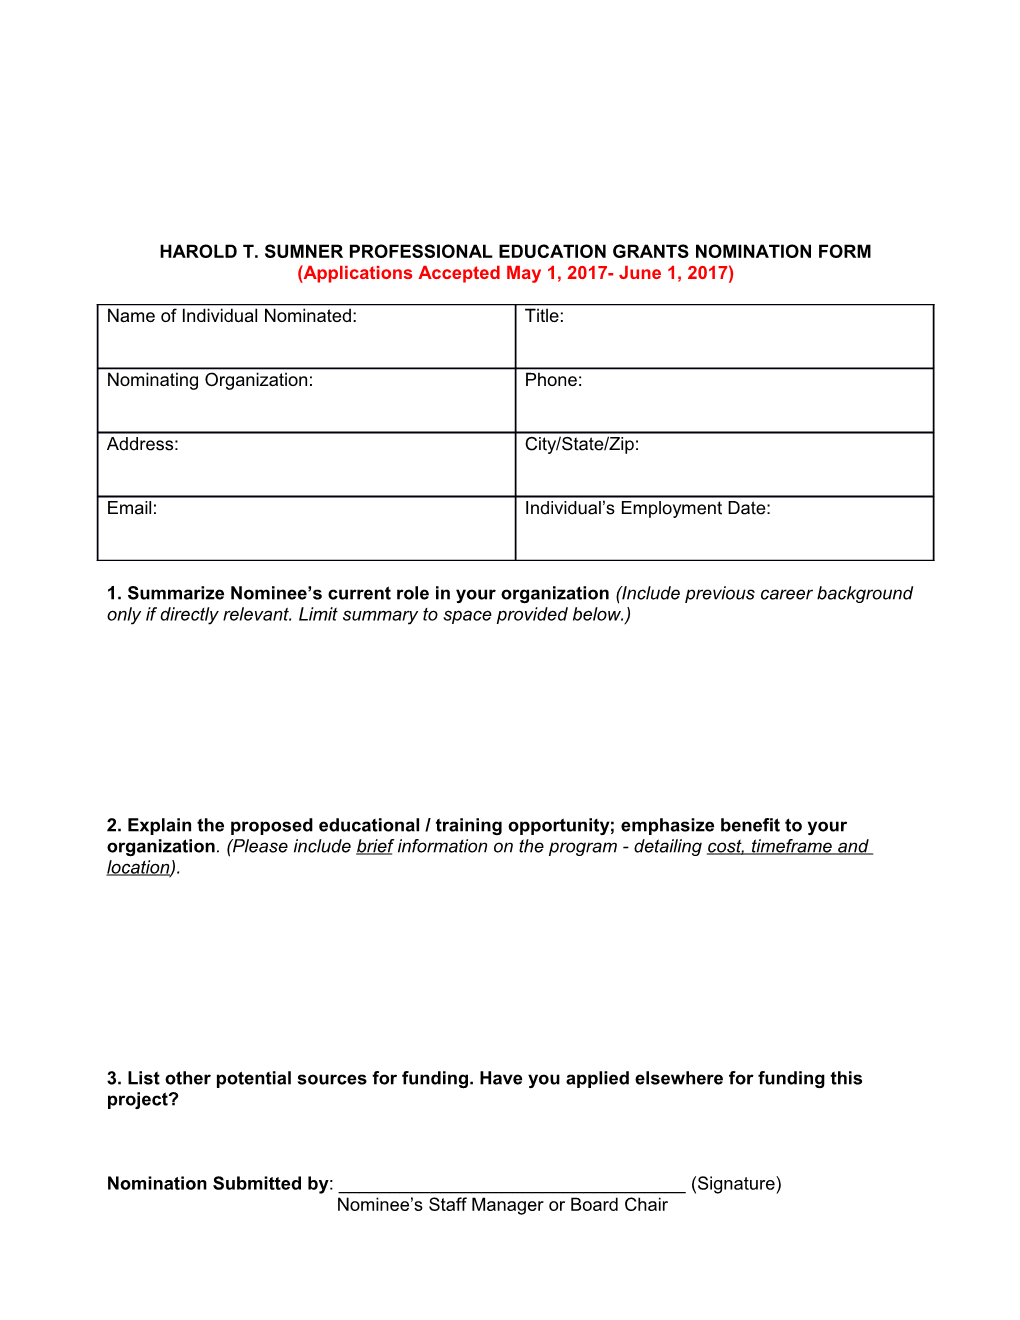 HAROLD T. SUMNER PROFESSIONAL EDUCATION GRANTSNOMINATION FORM(Applications Accepted May